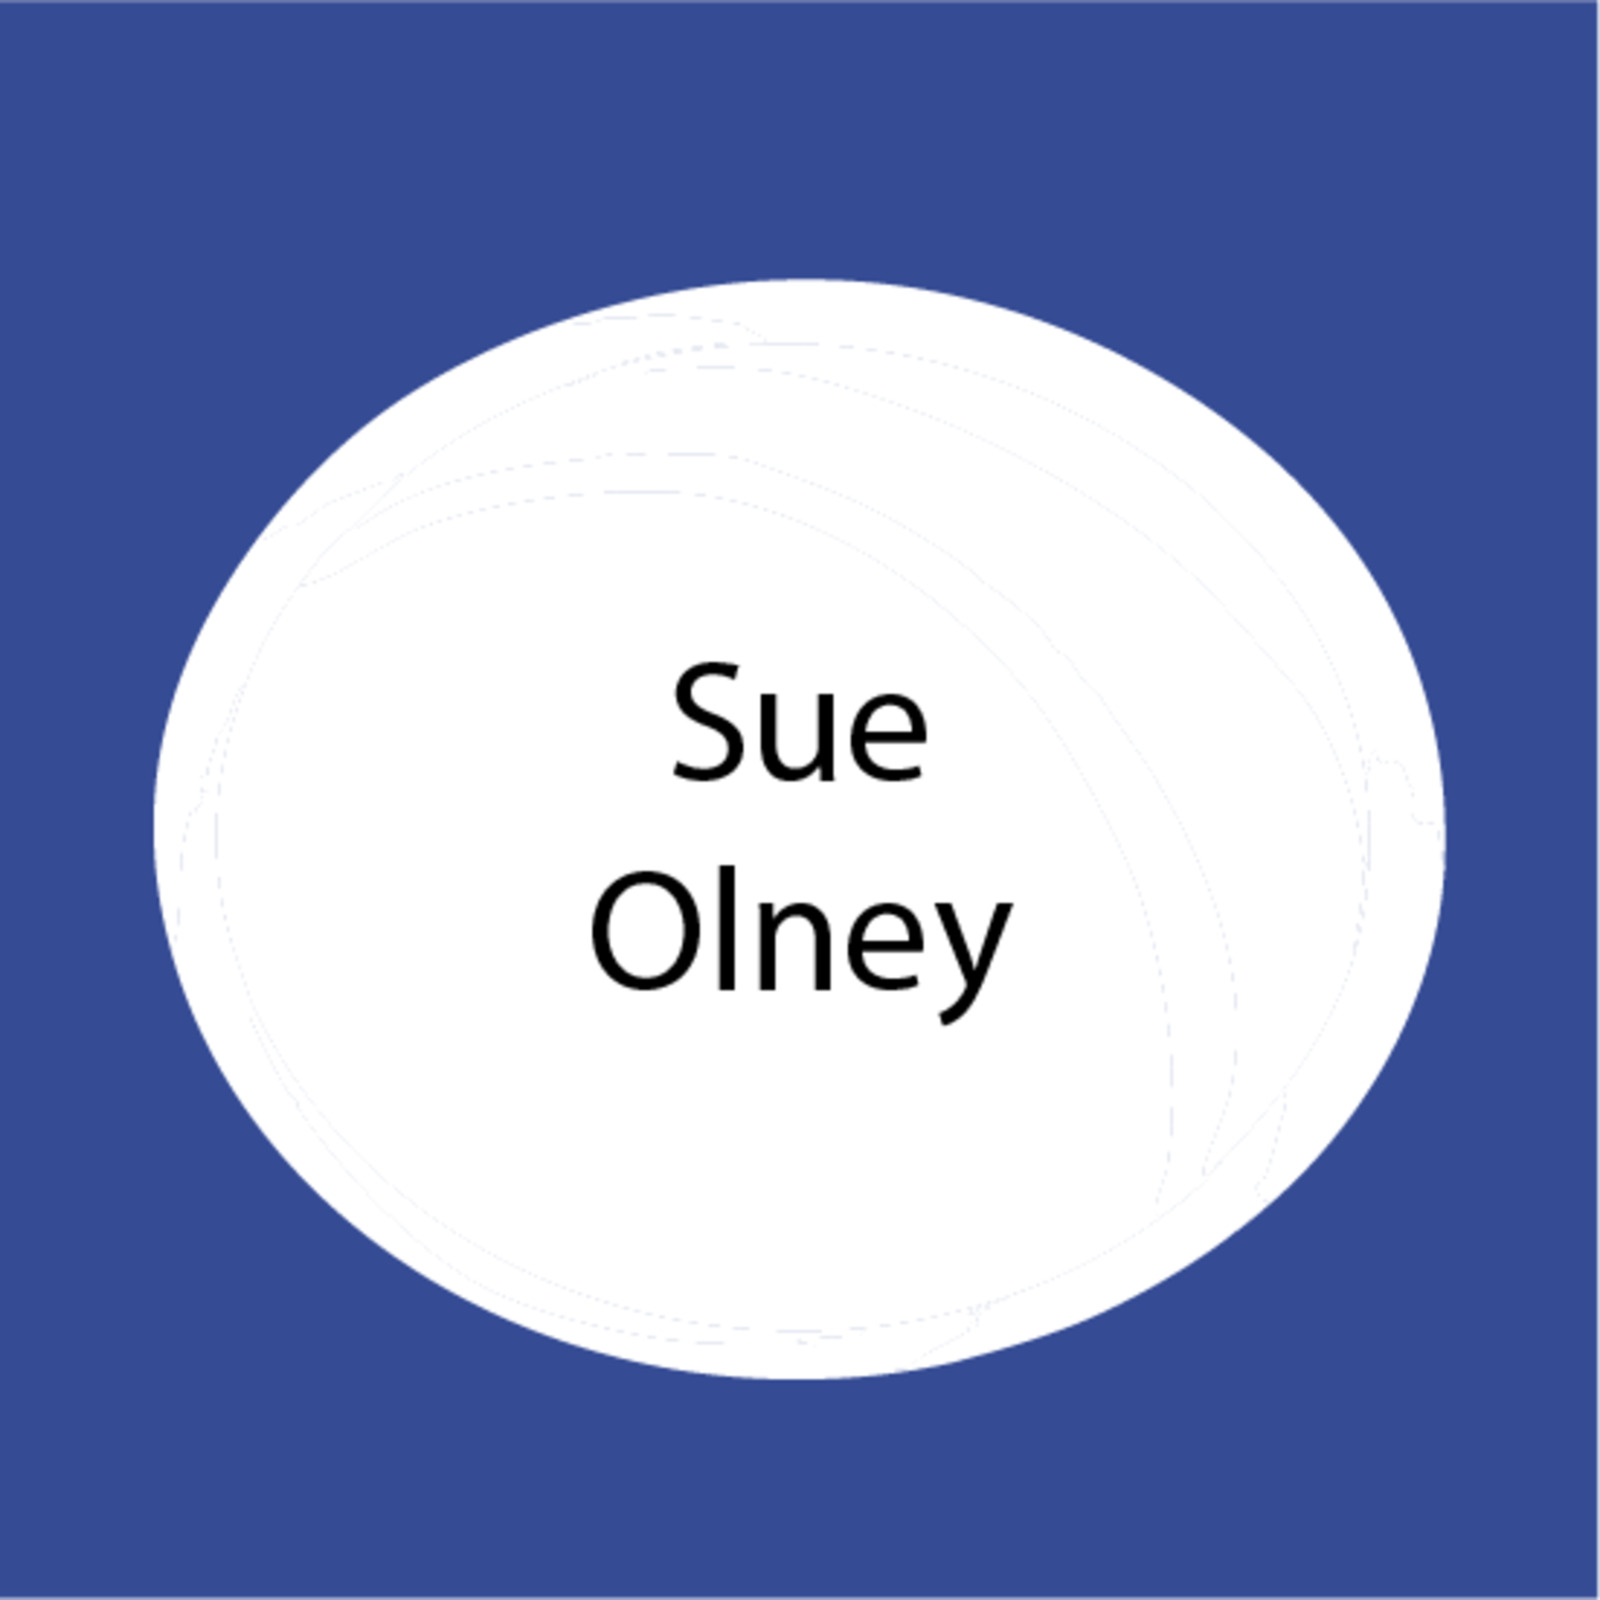 Sue Olney.png